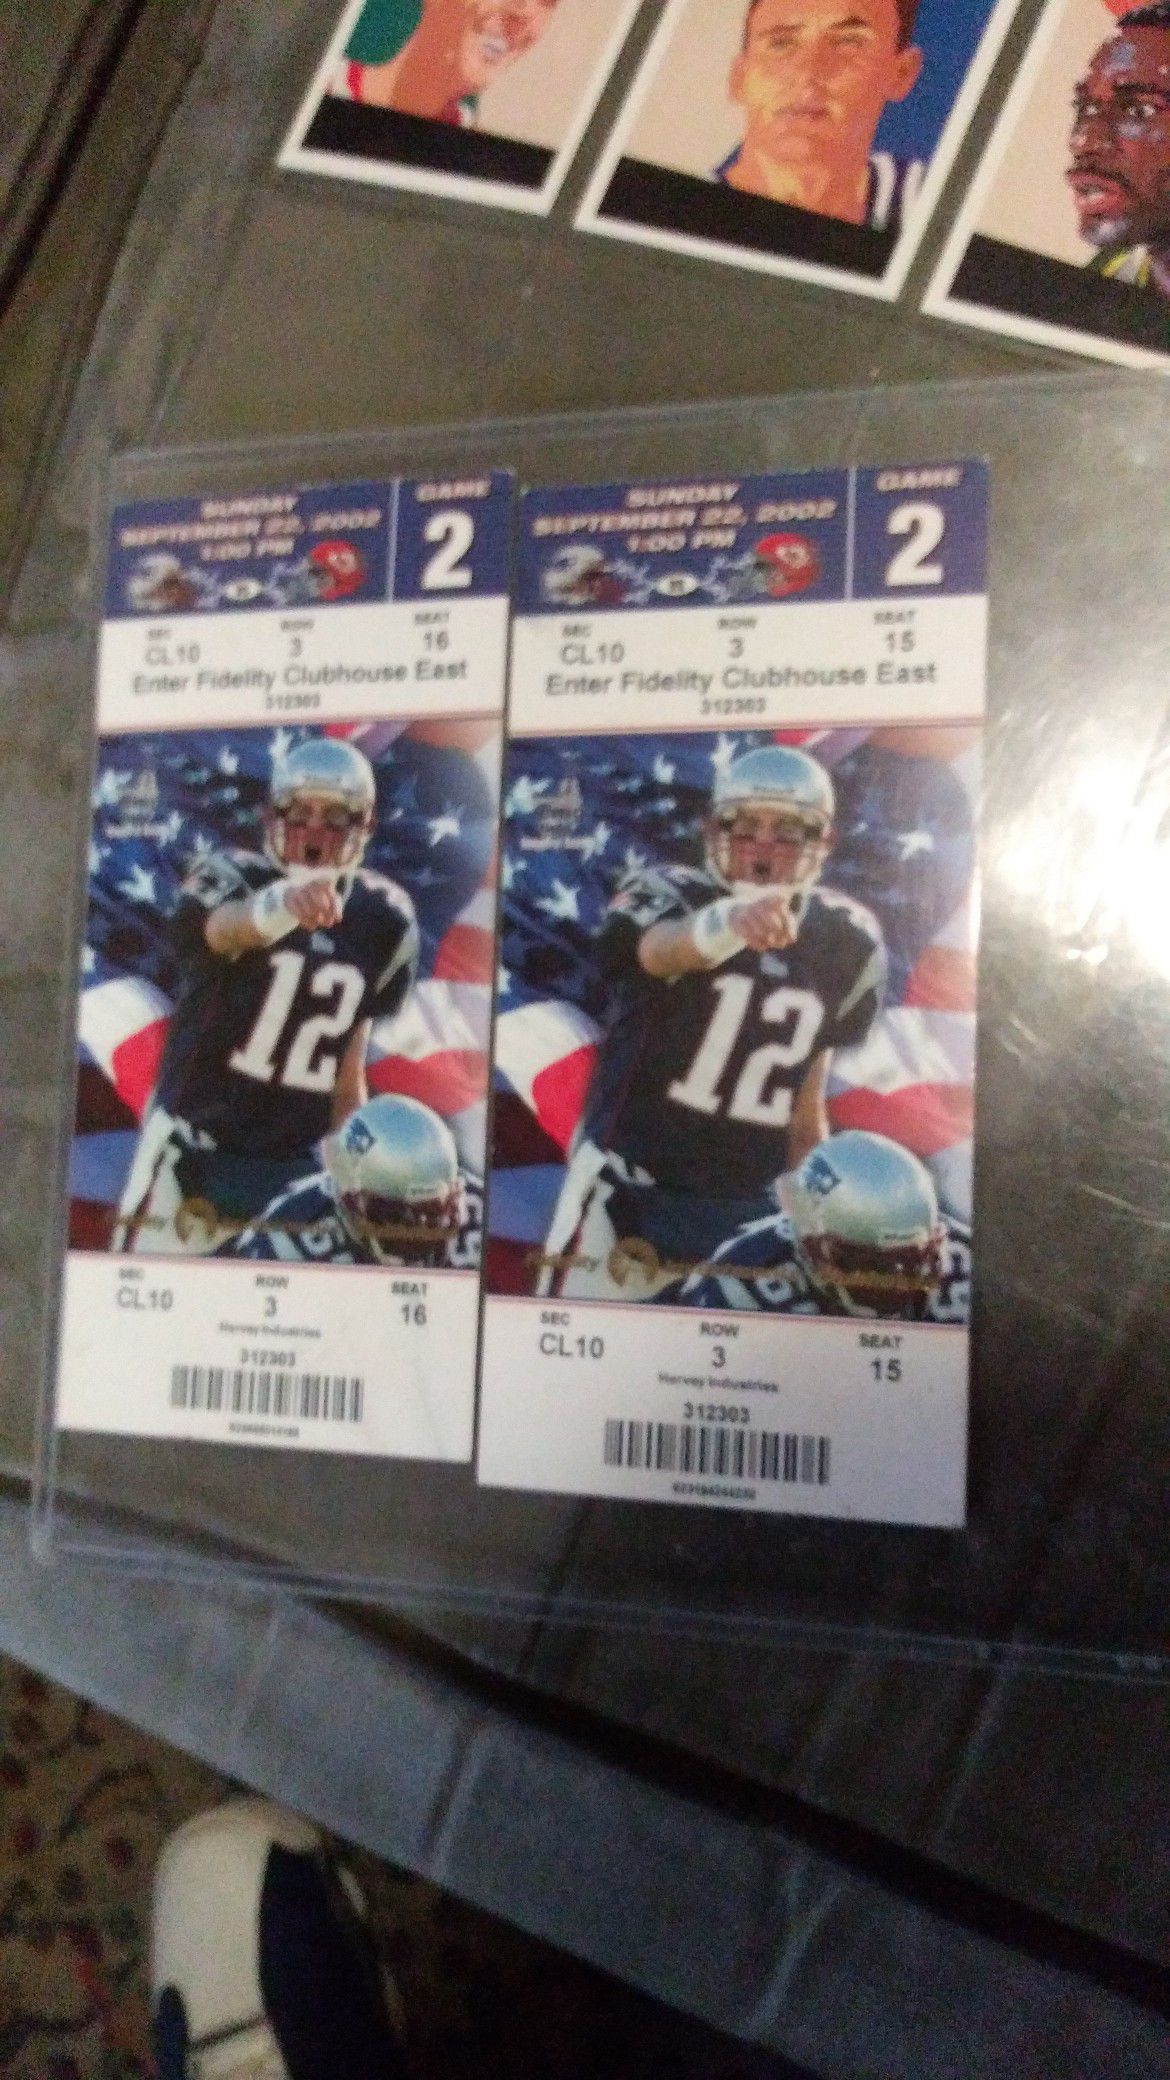 2002 unused pats game tickets.